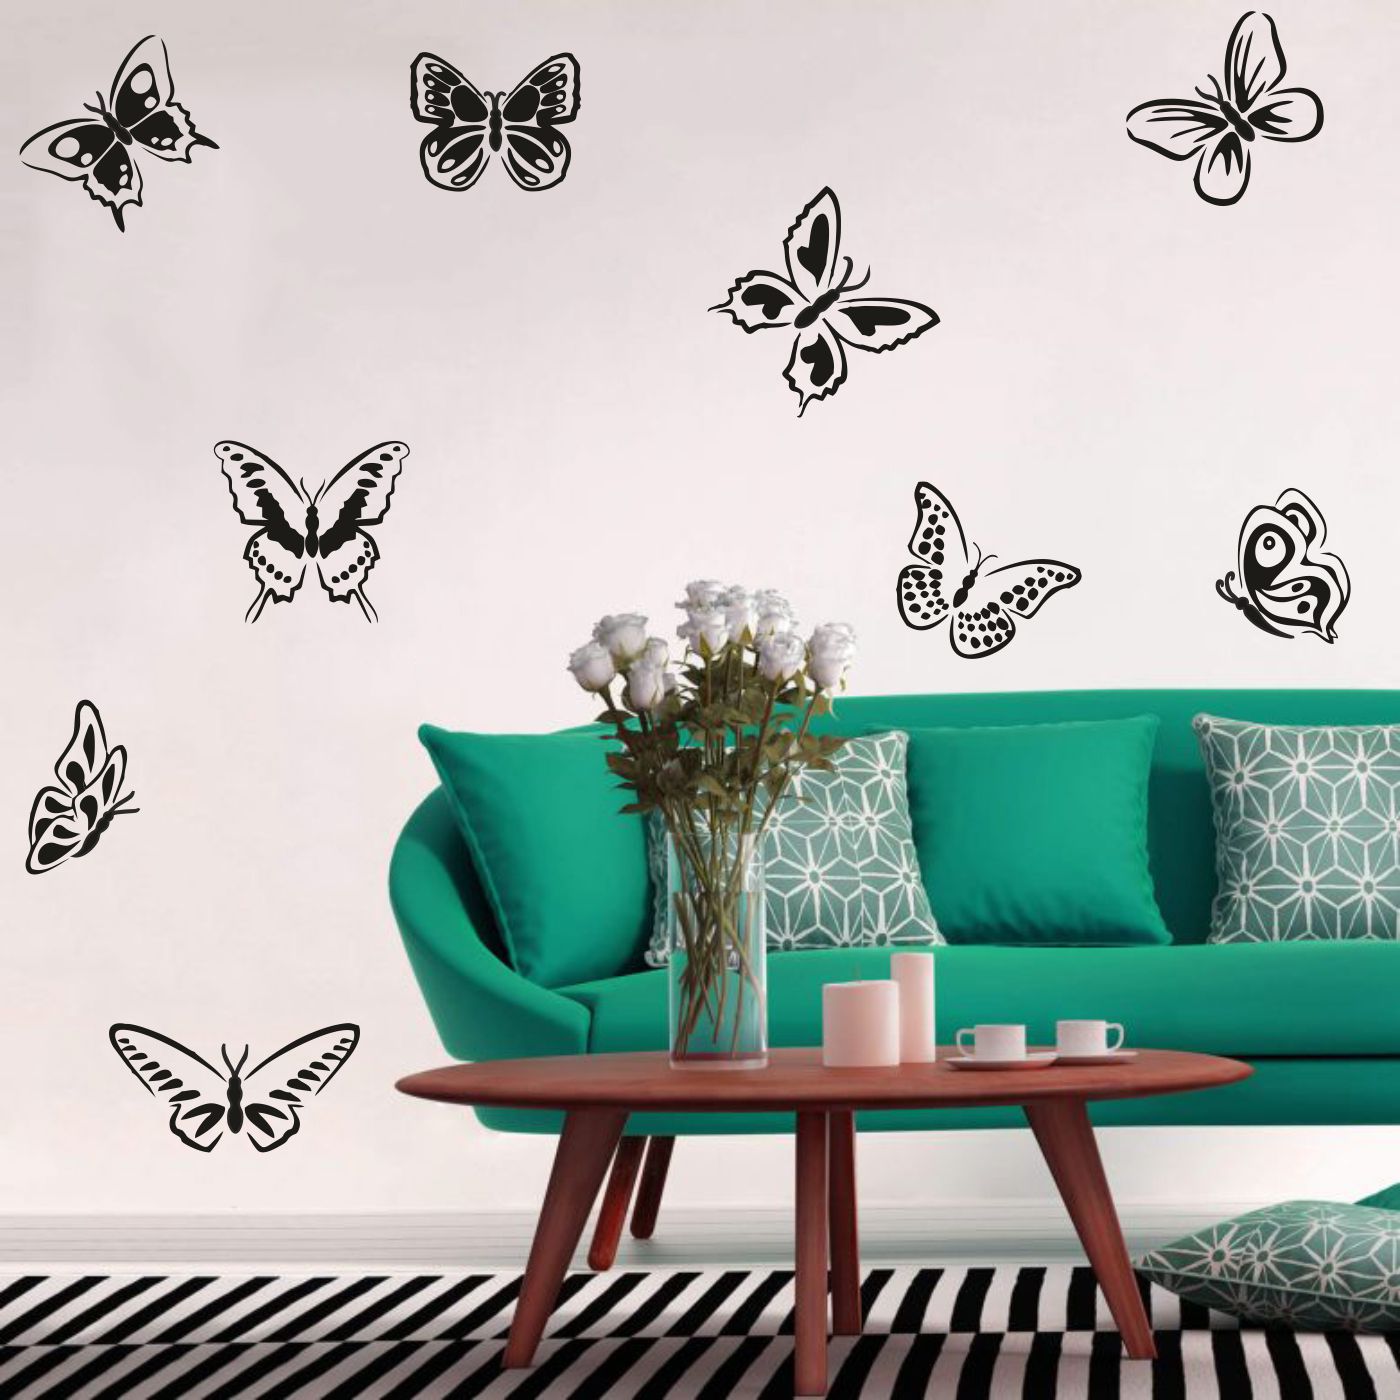 ORKA Butterfly Theme Wall Decal Sticker   16